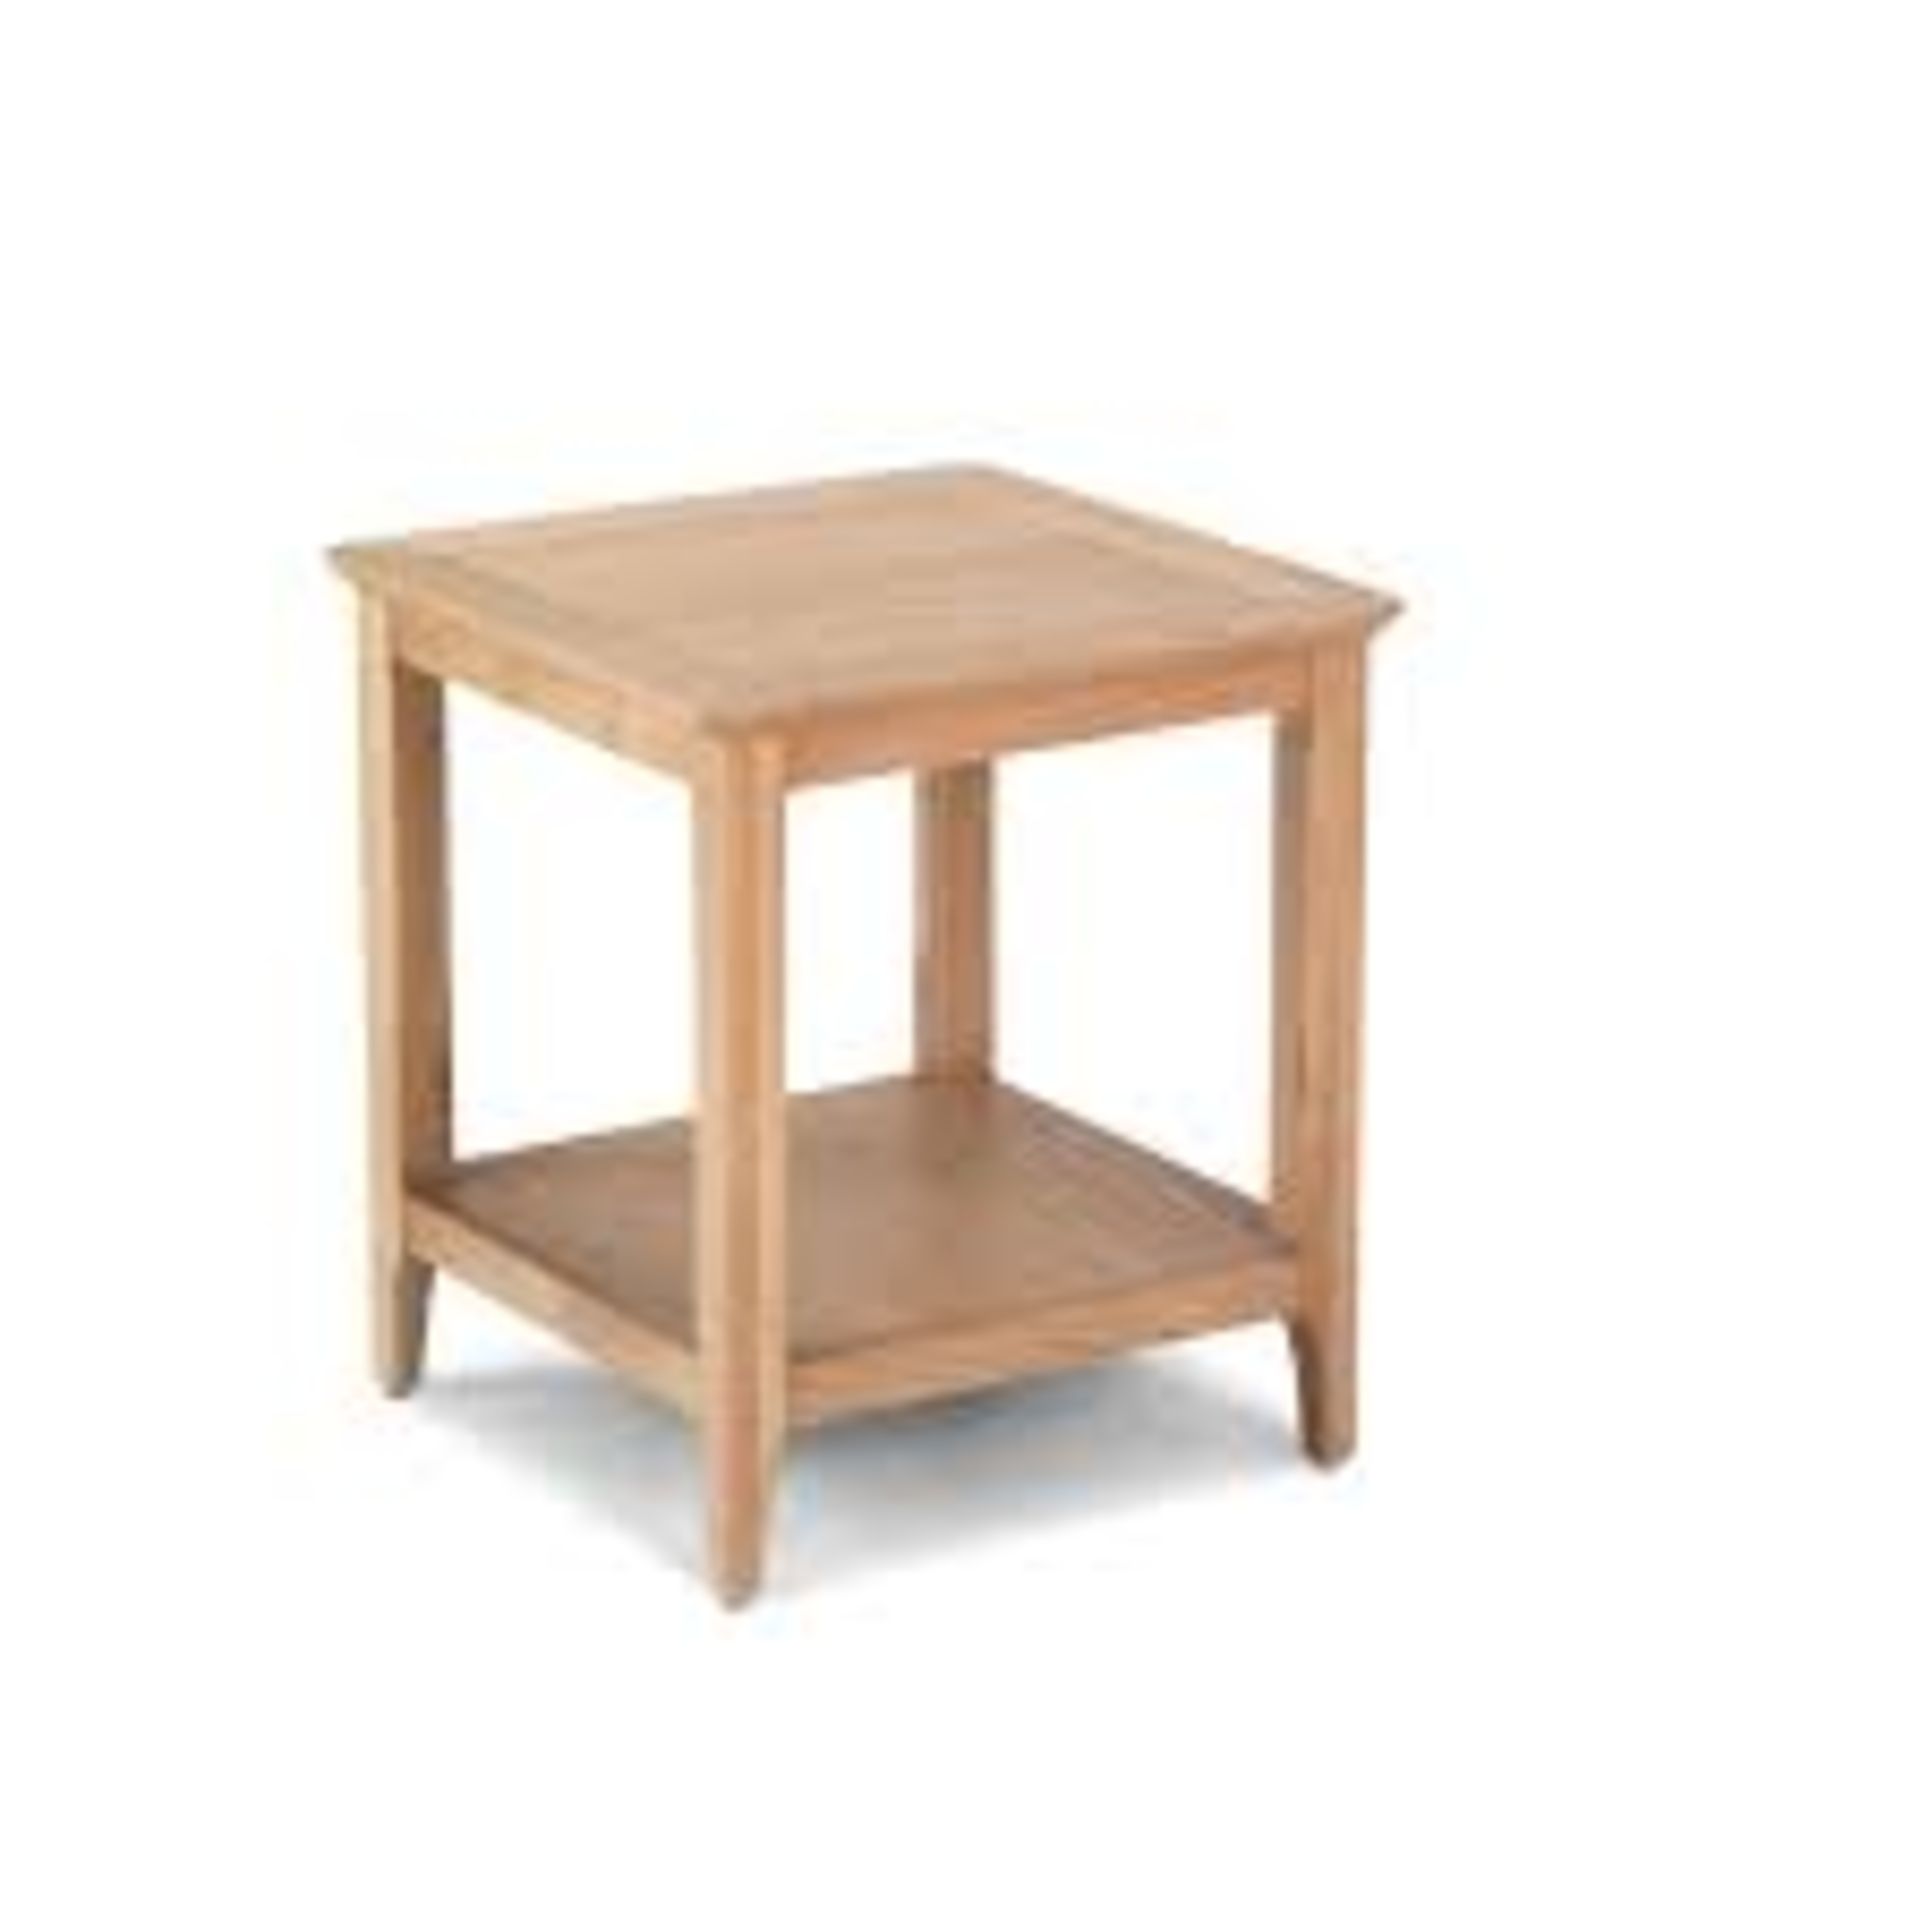 Boxed Westley Coffee Table RRP £105 (18030) (Pictures Are For Illustration Purposes Only) (